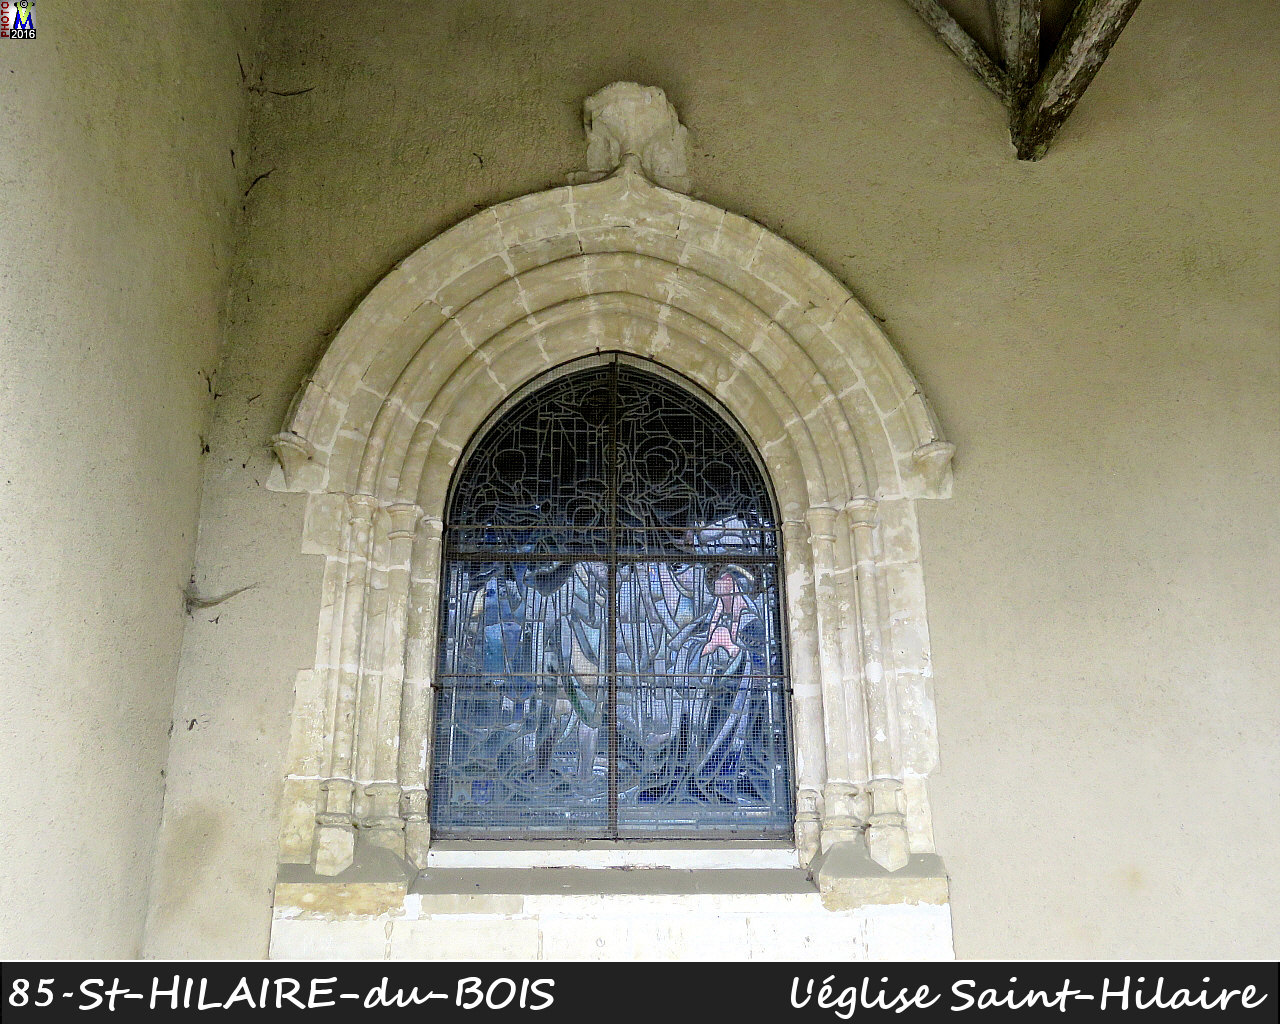 85CAILLERE-StHILAIRE-HILAIRE_eglise_1012.jpg